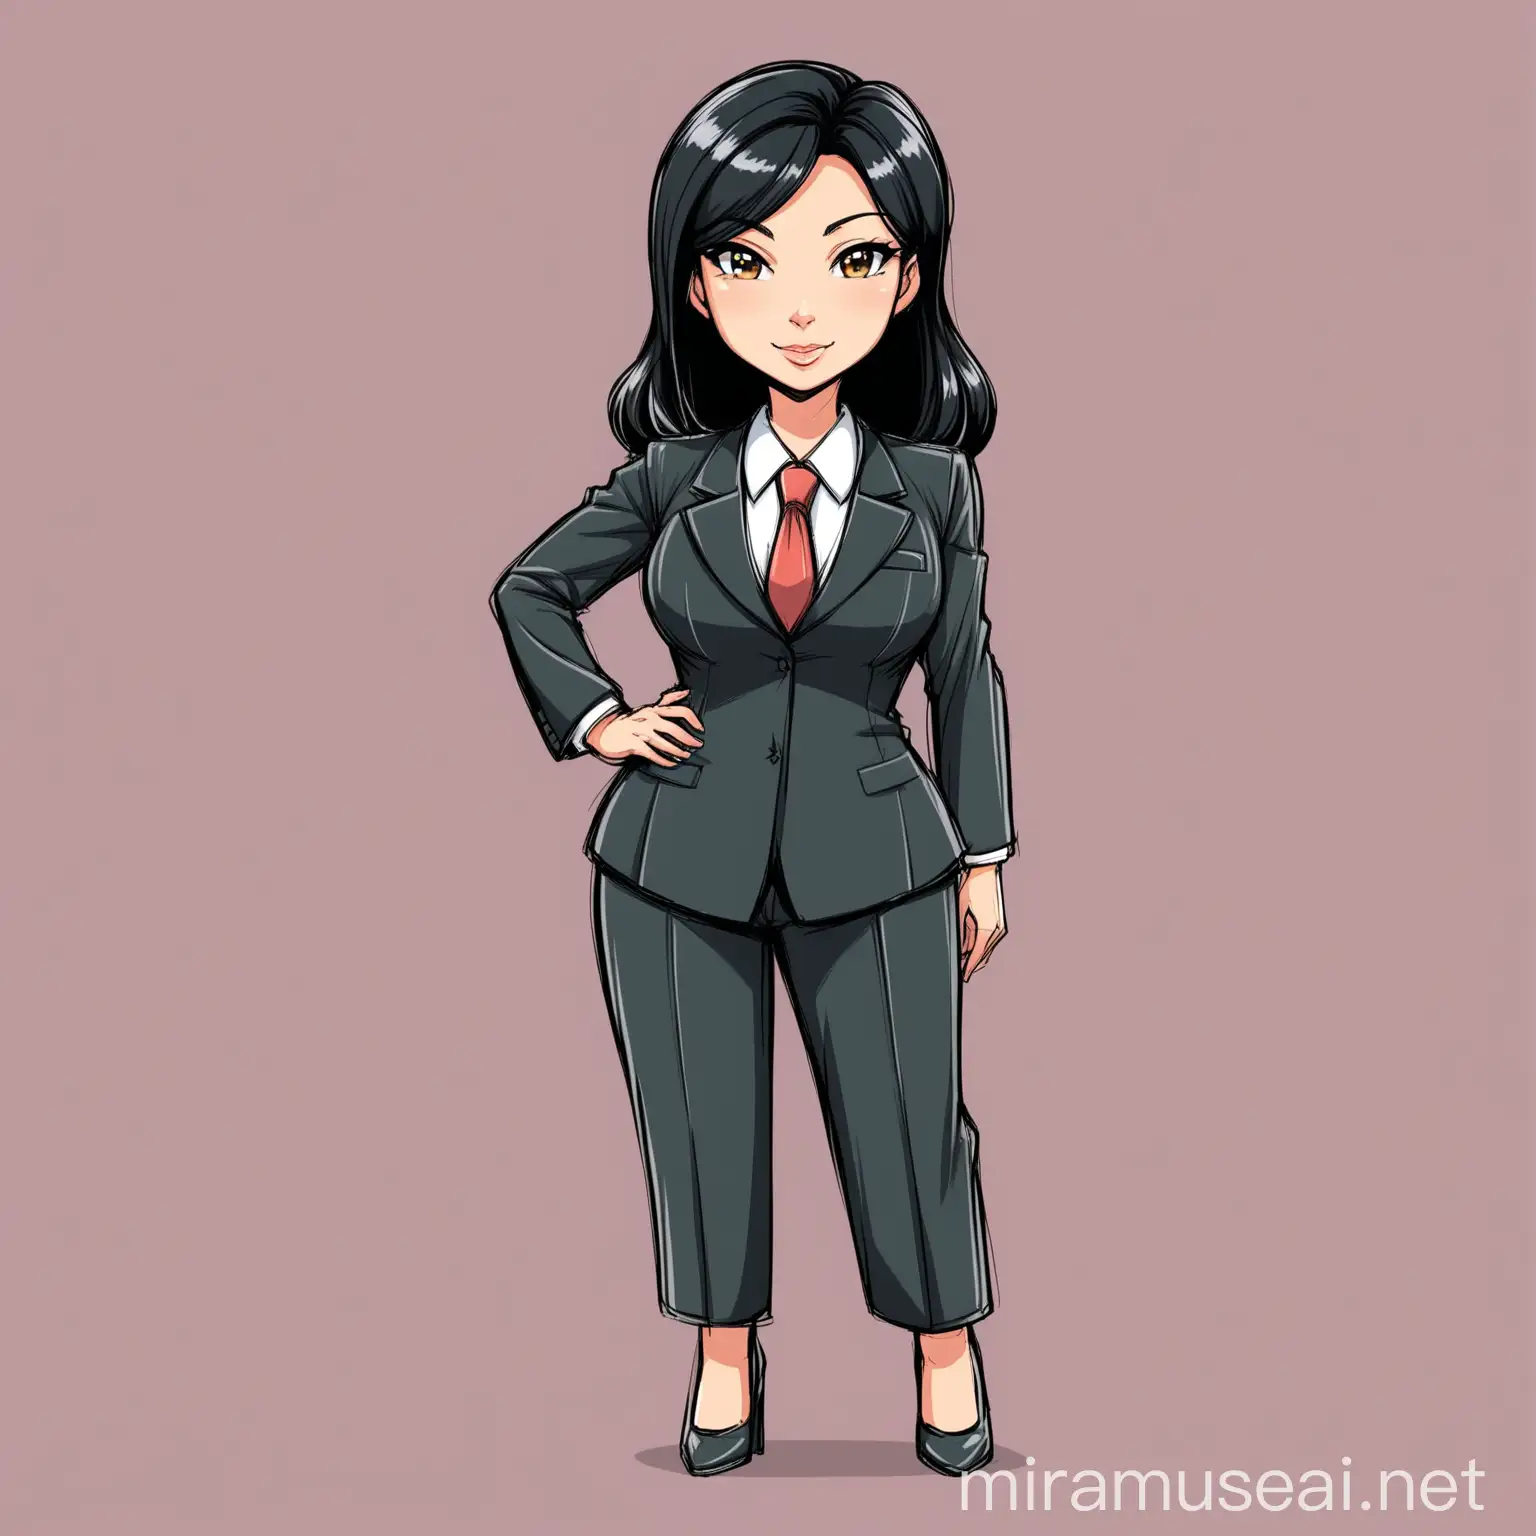 Cartoony color:
A beautiful
woman she is a lawyer 40years old with black hair, she has worn an elegant suit full body